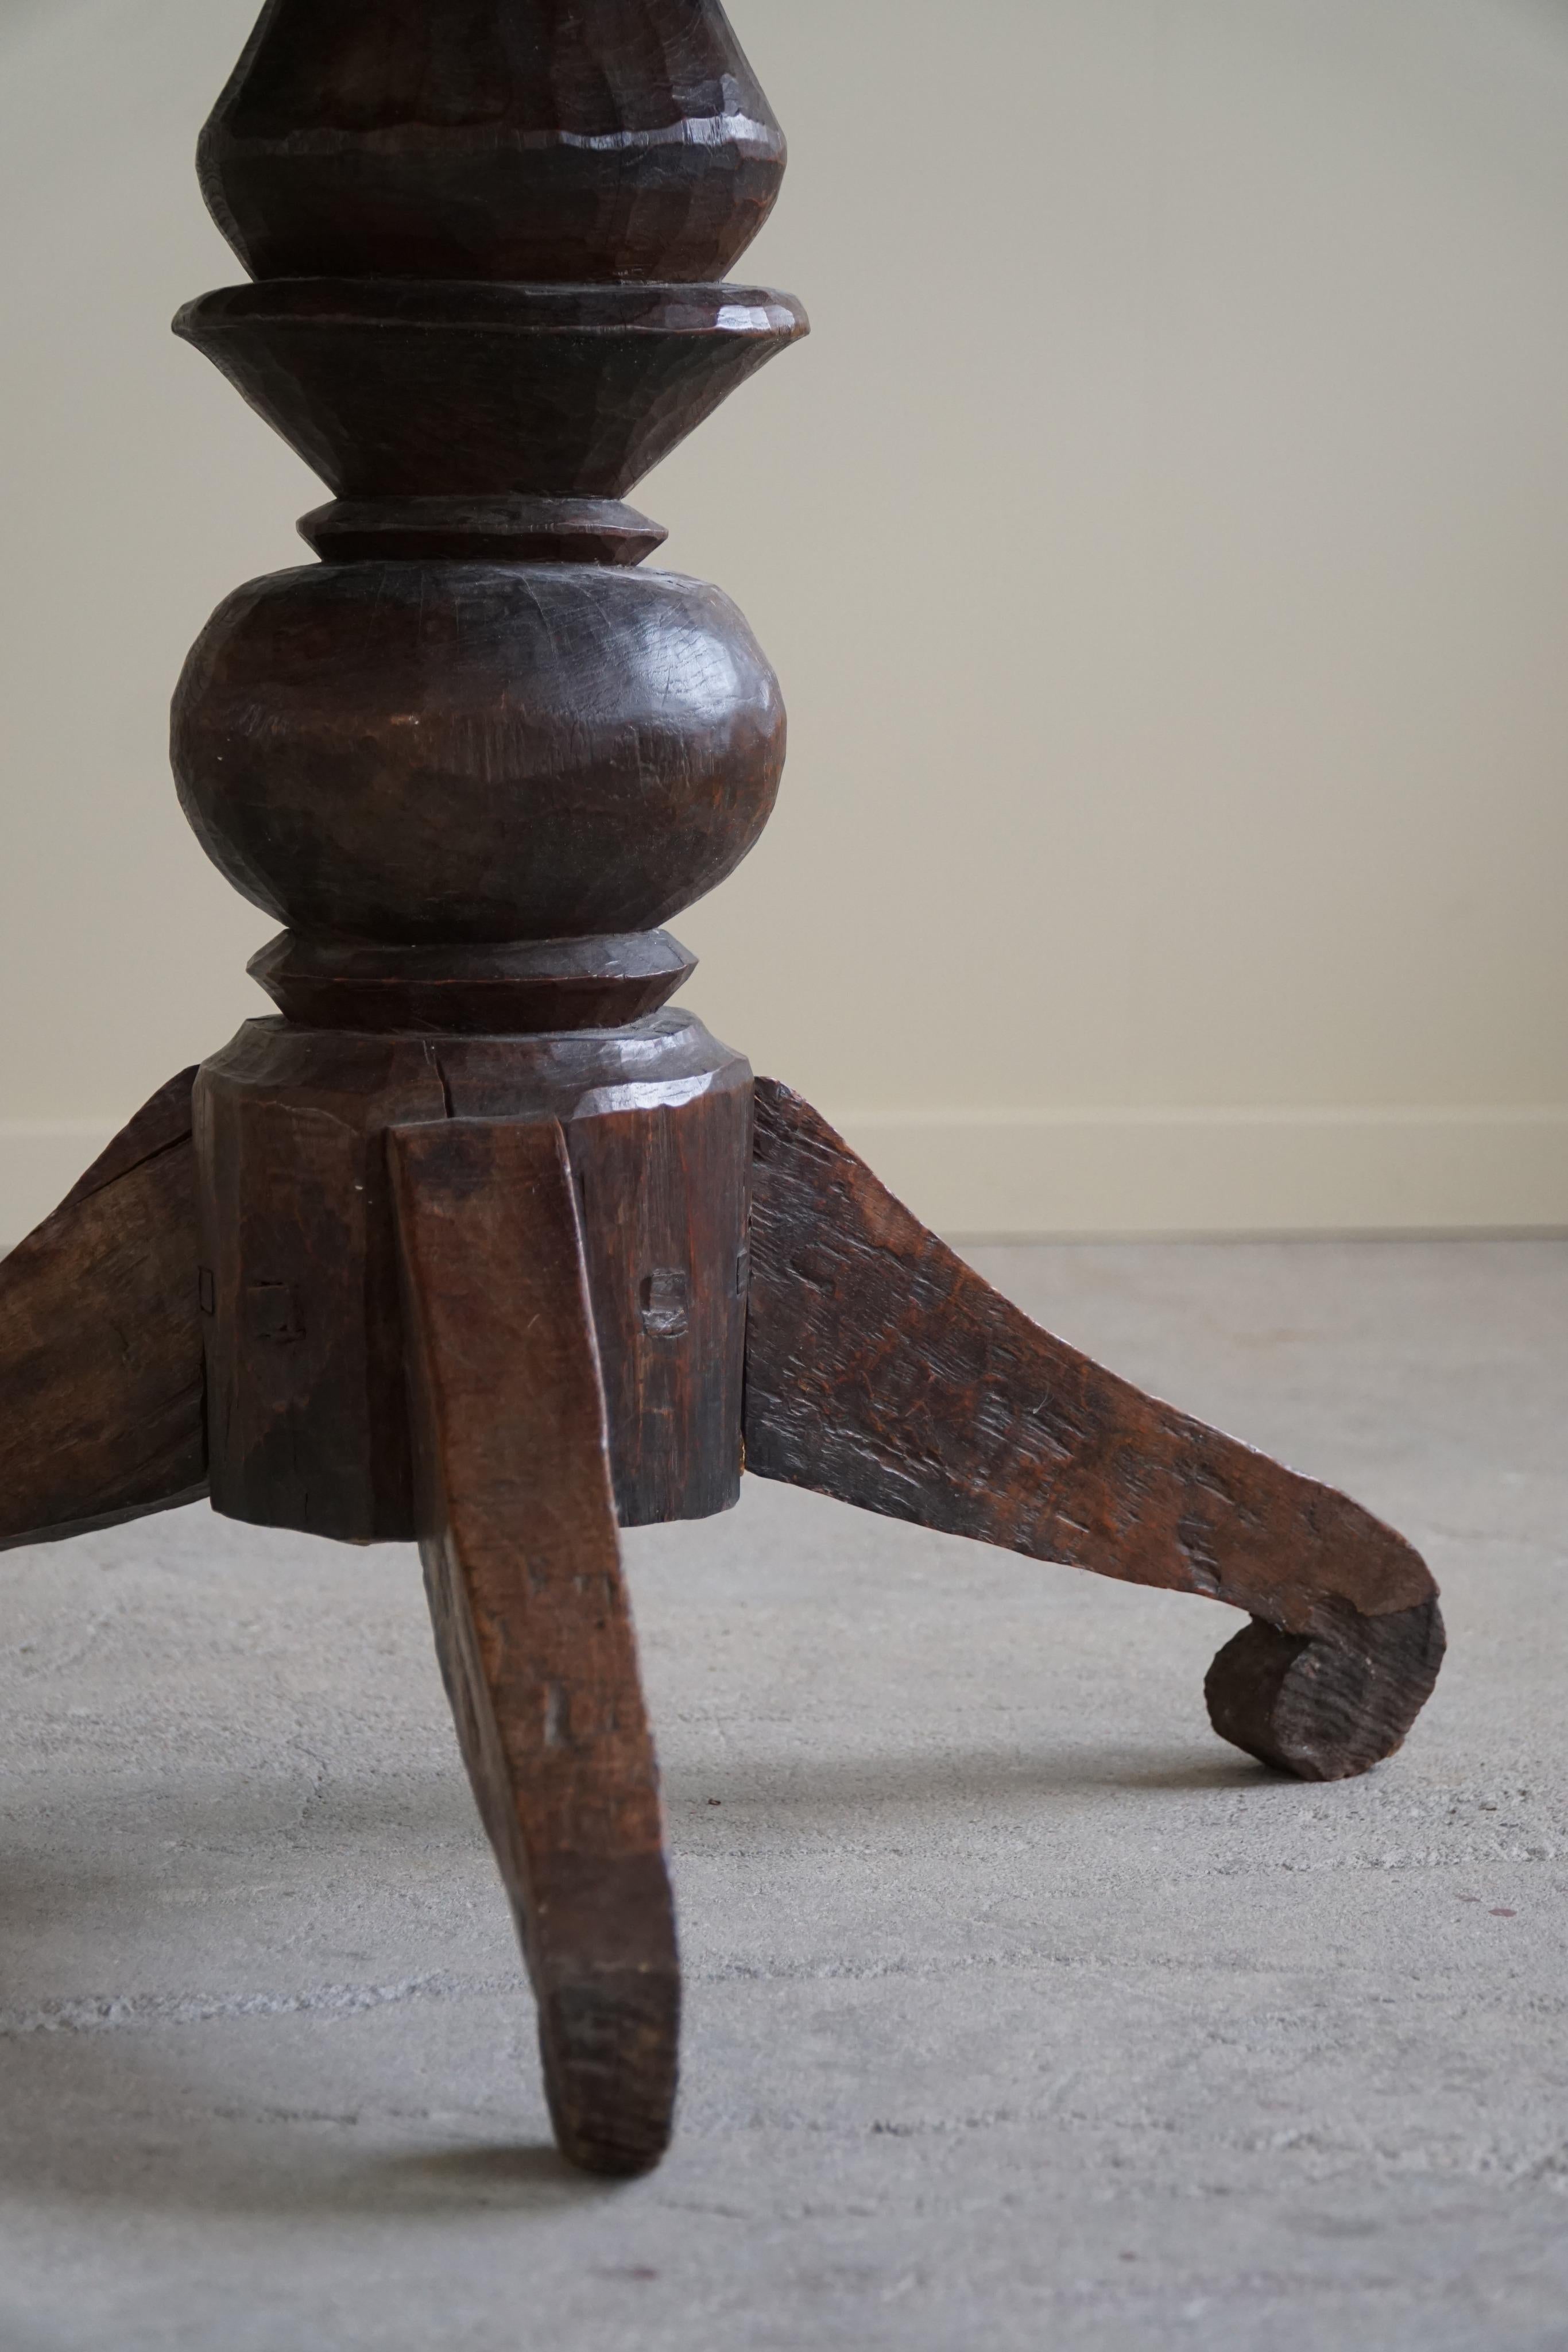 Wood Antique Oak Dining Table / Side Table with Tripod Legs, Wabi Sabi, Late 18th C